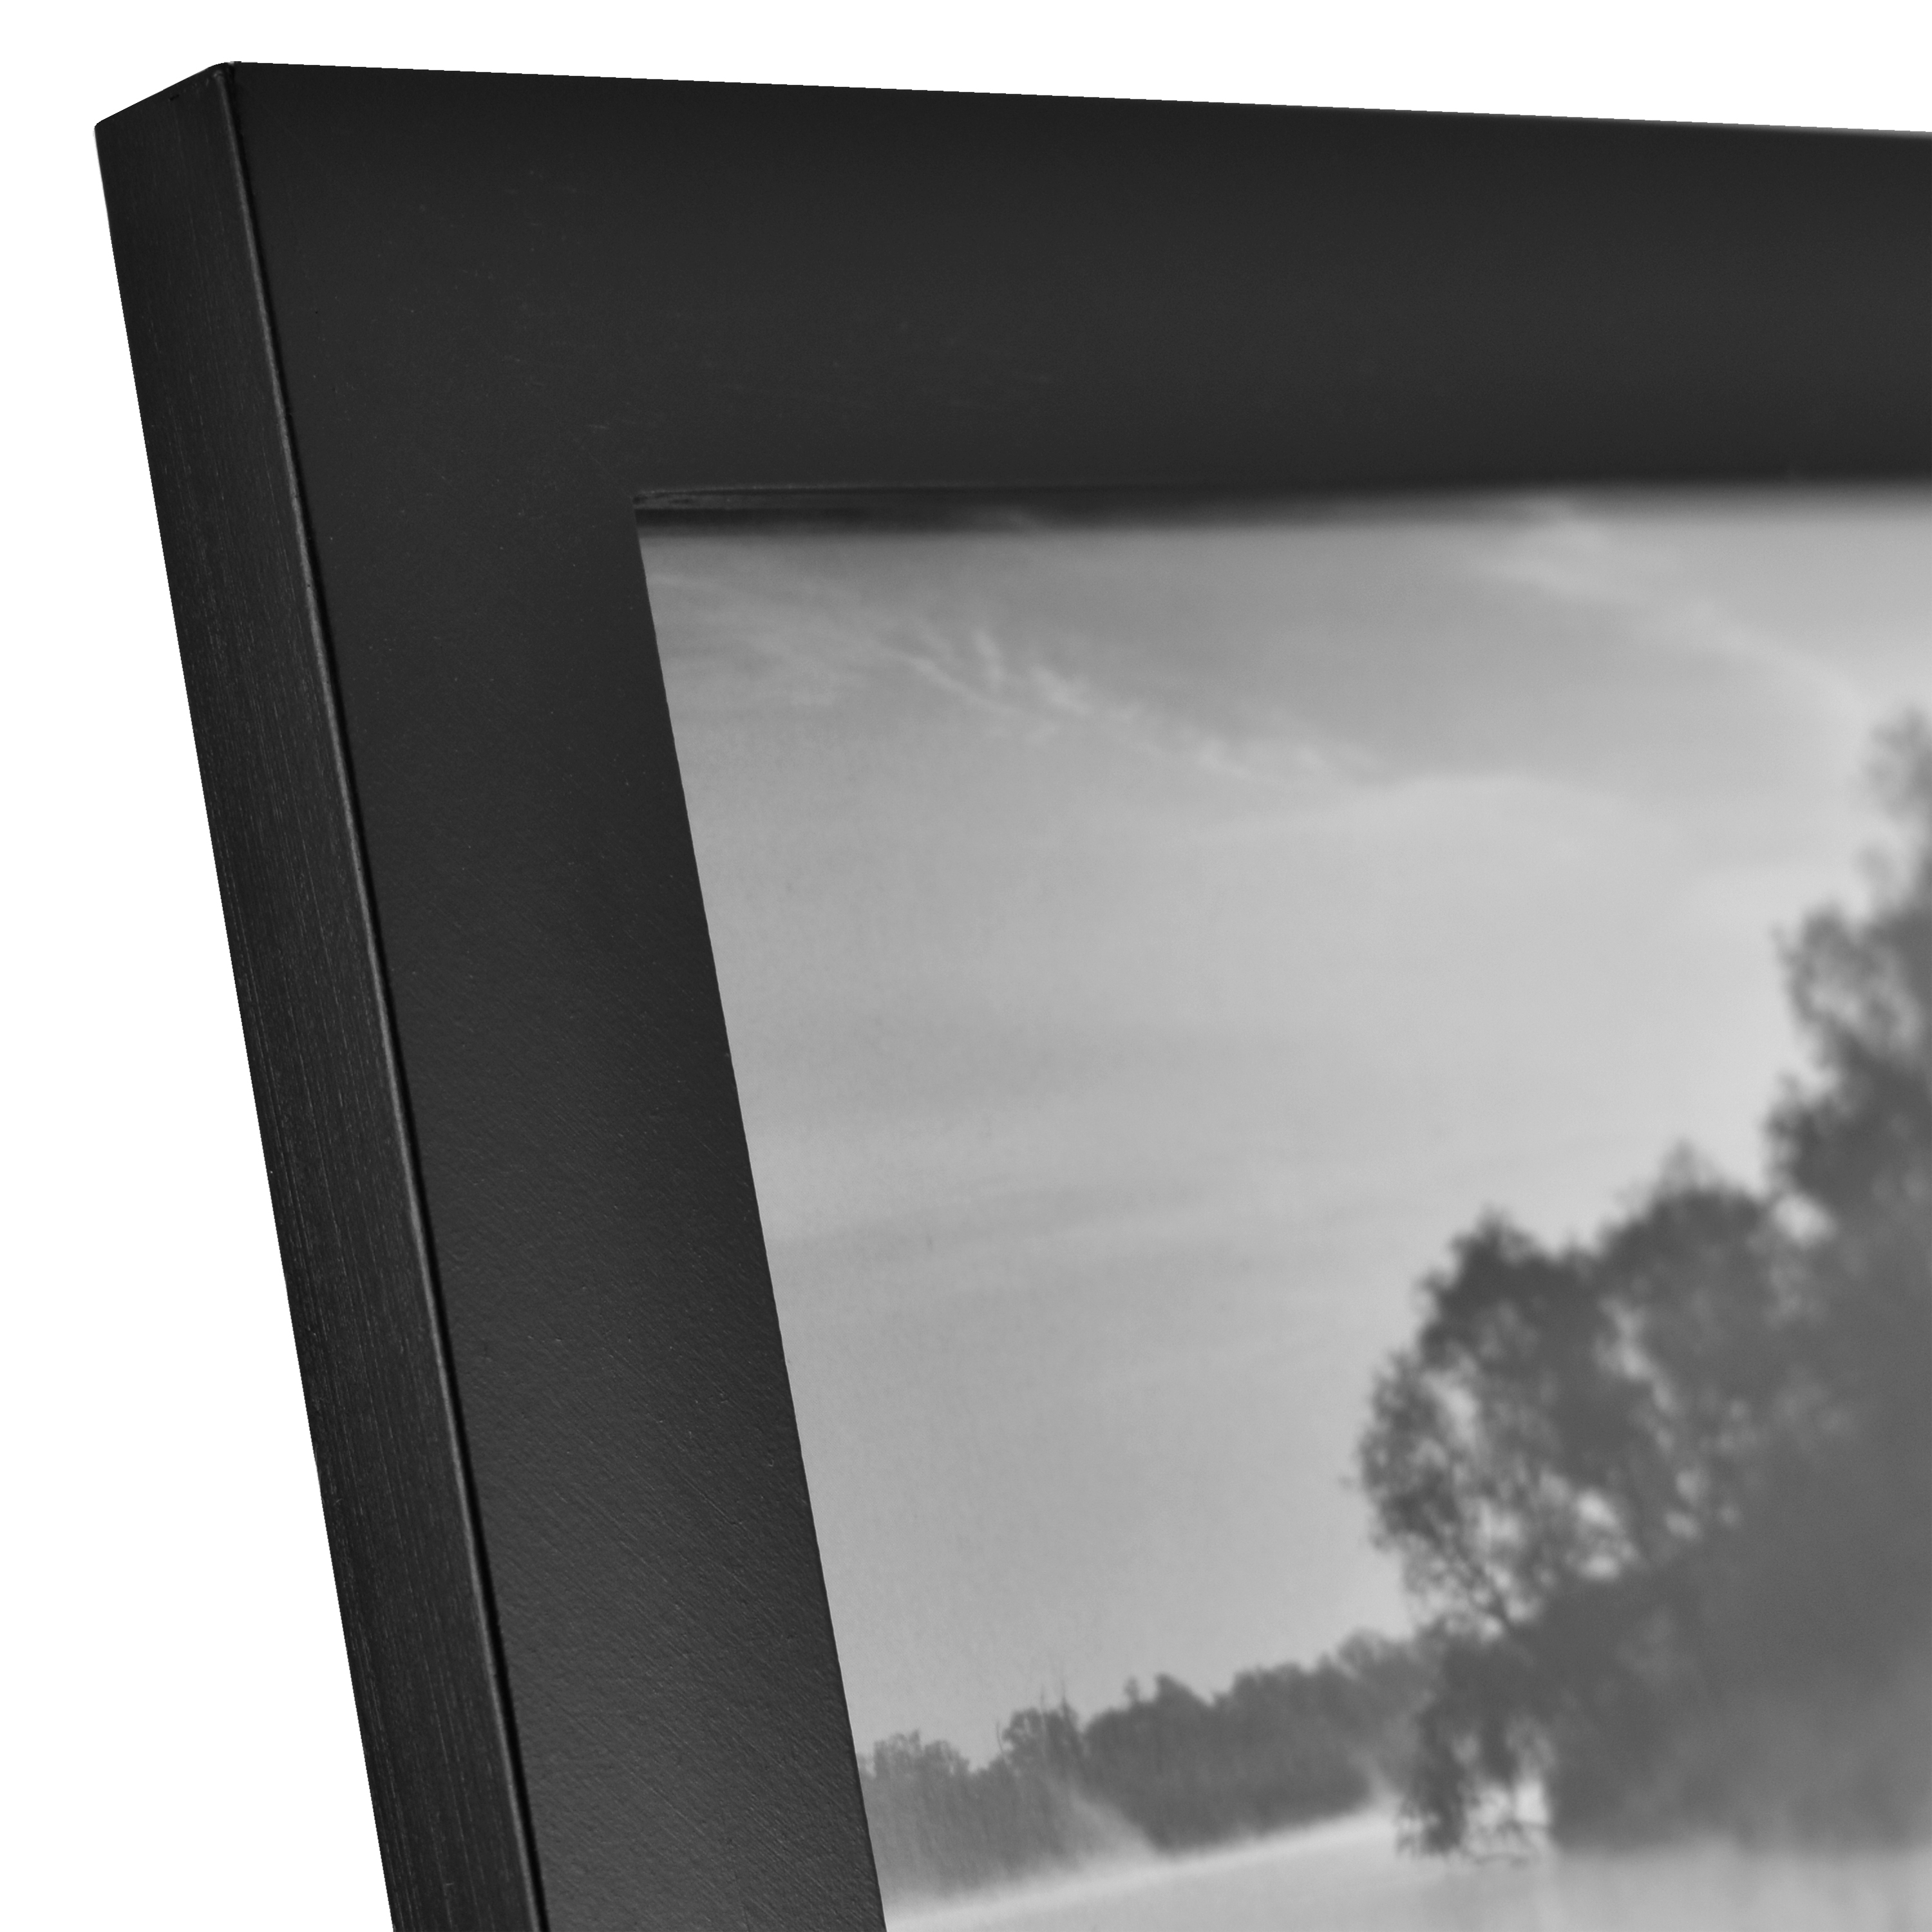 Gallery Flat-Top Pine Wood Picture Frame Set, Set of 5 - image 5 of 6